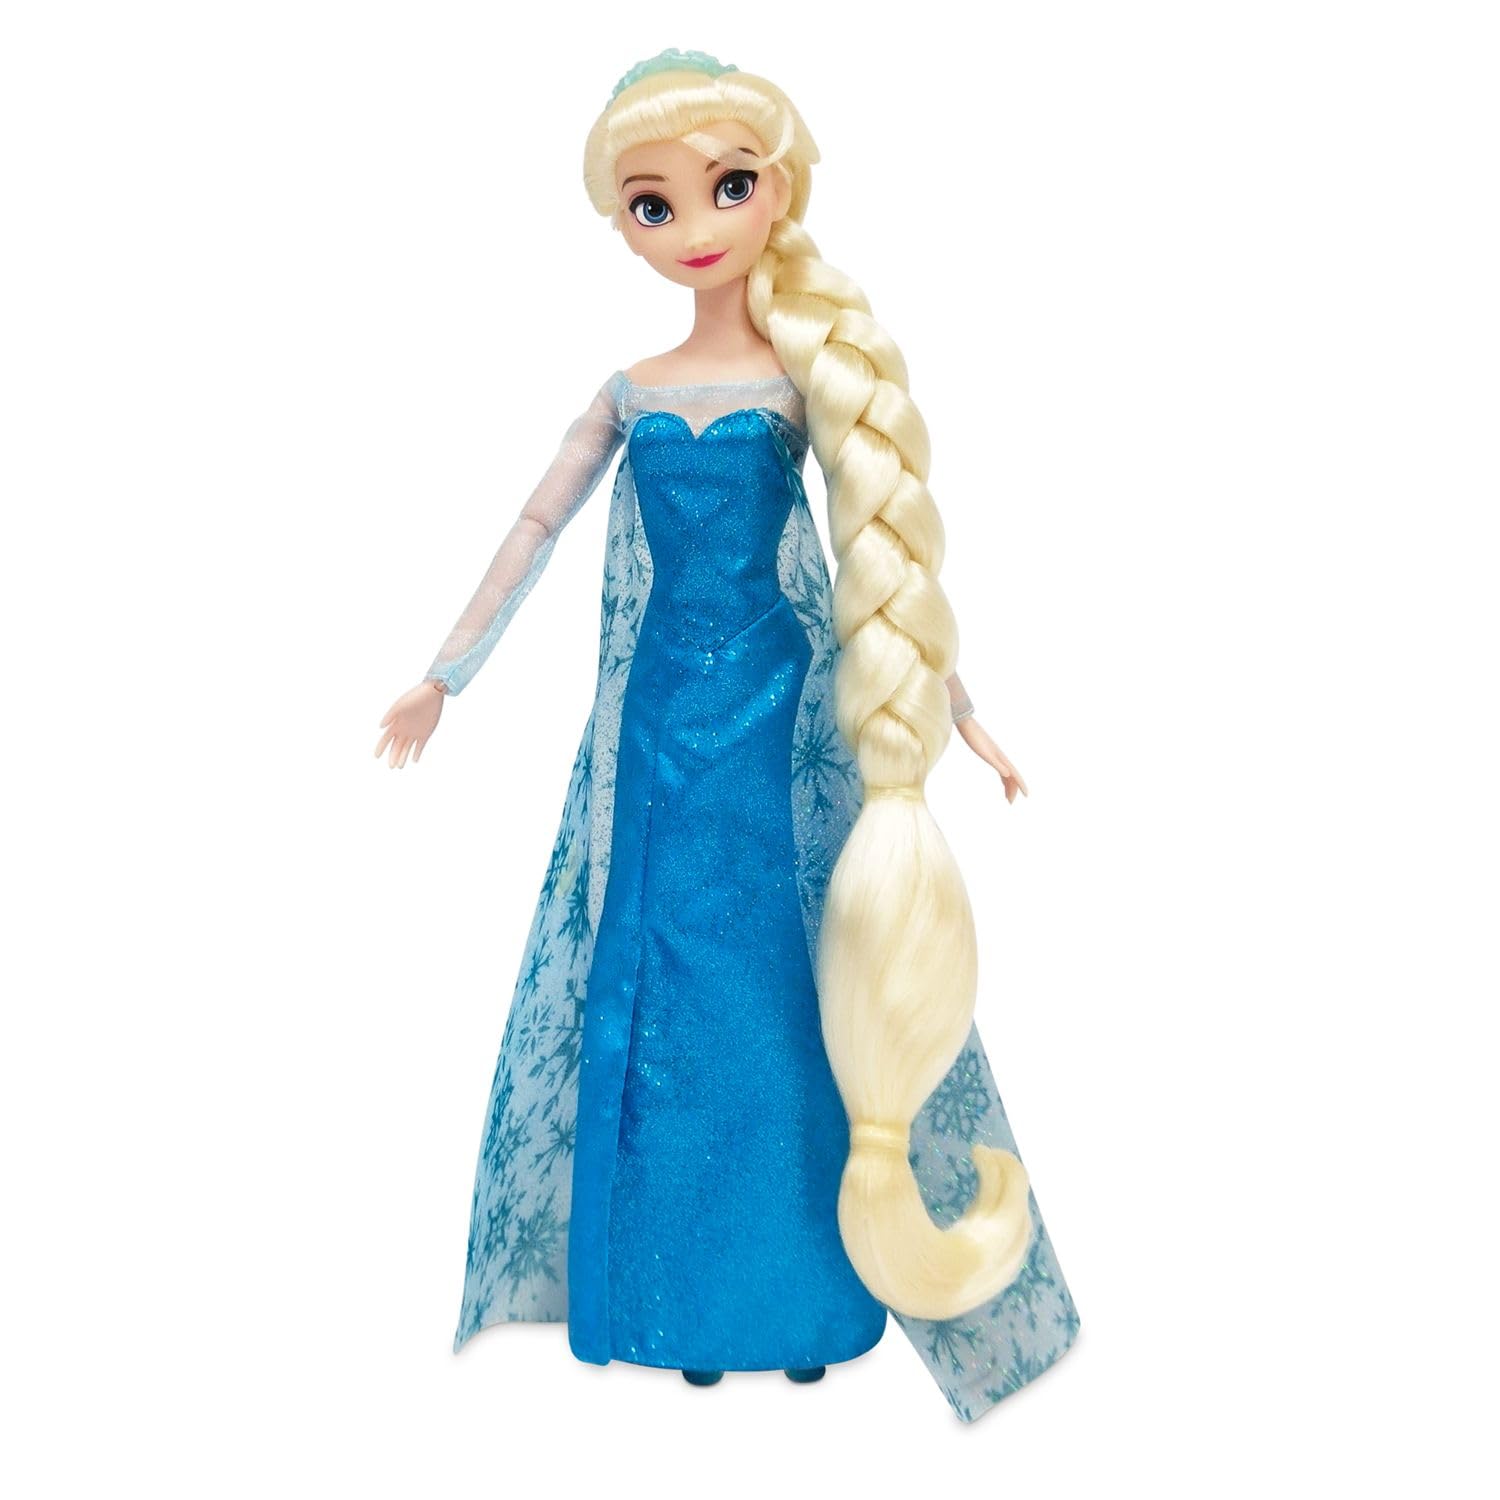 Disney Store Official Elsa Hair Play Doll – Frozen - 11 inch - Interactive Hairstyling Fun - Recreate Enchanted Looks for Frozen Fans & Collectors - Durable & Kid-Friendly